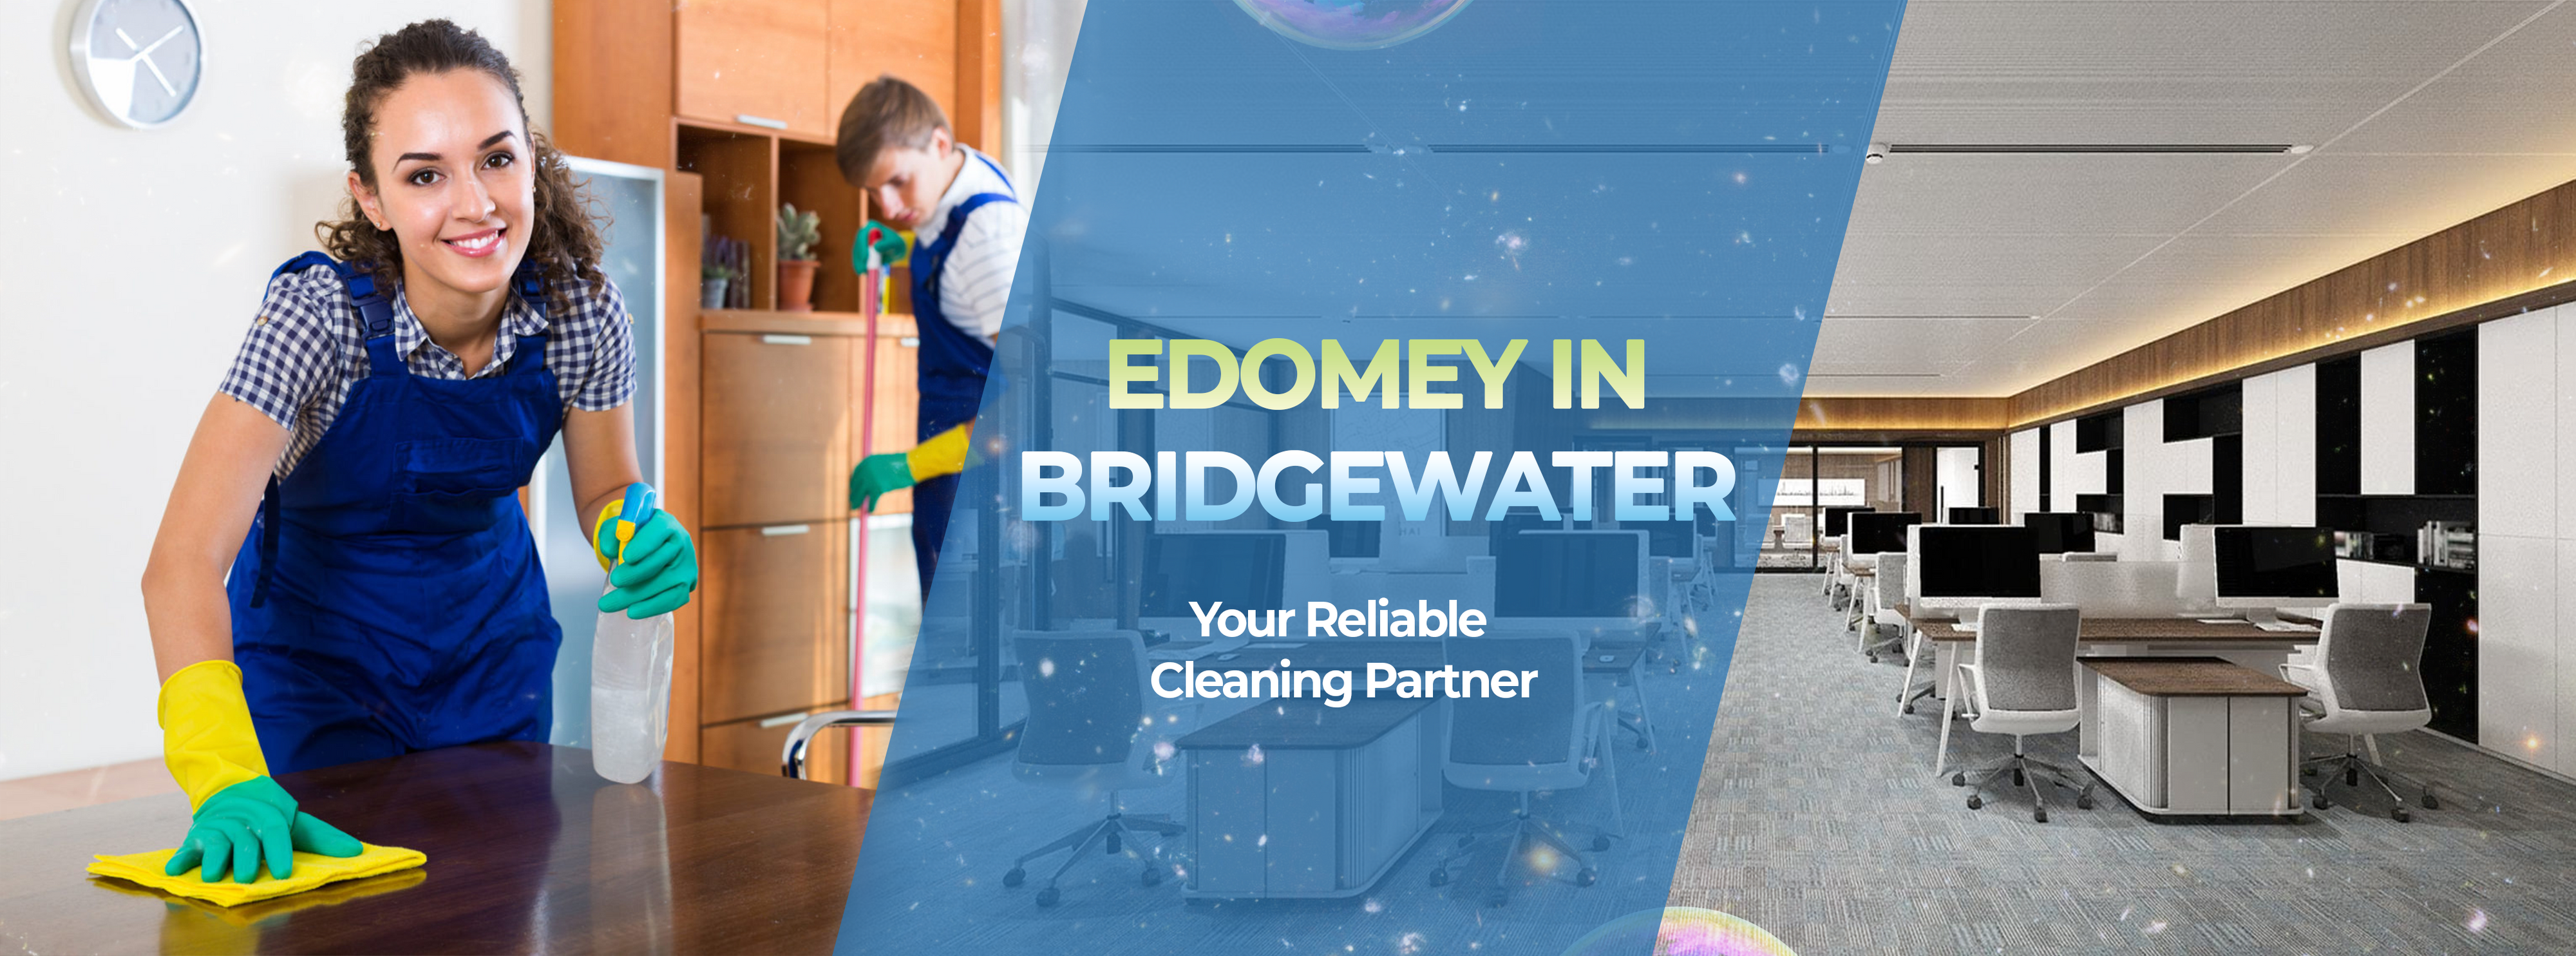 professional Commercial Cleaning Services in Bridgewater